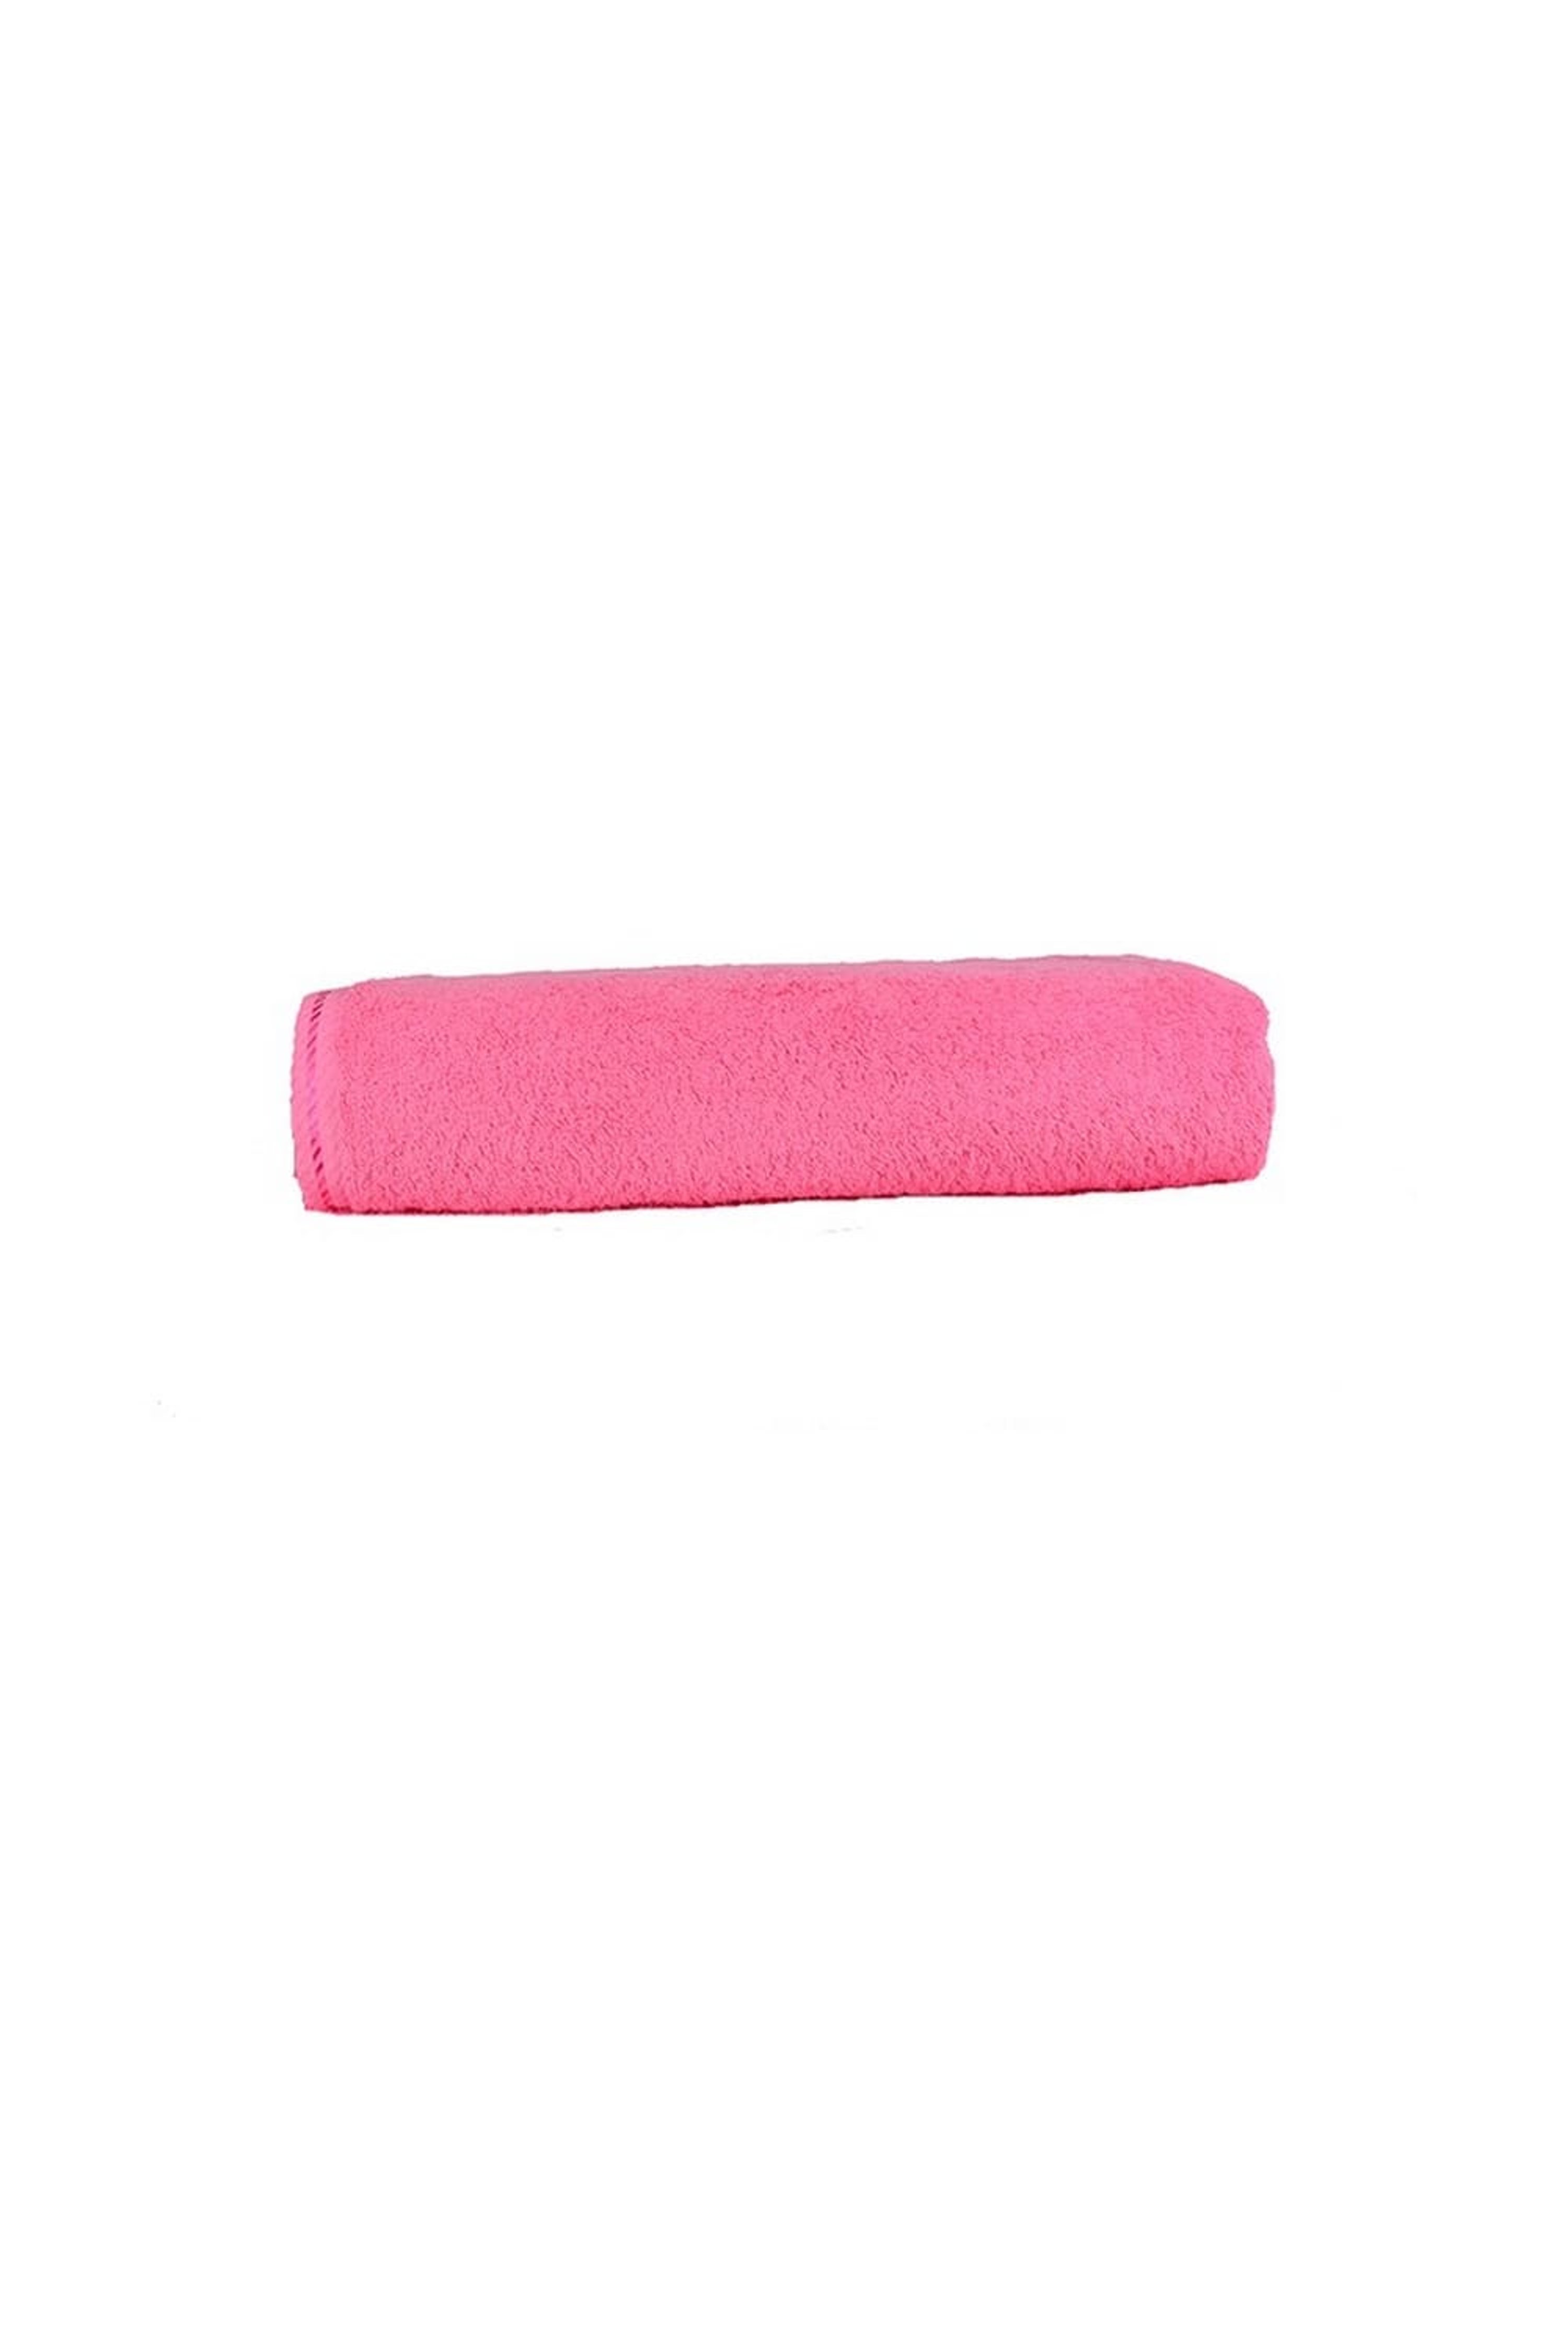 A&R TOWELS A&R TOWELS A&R TOWELS ULTRA SOFT BATH TOWEL (PINK) (ONE SIZE)